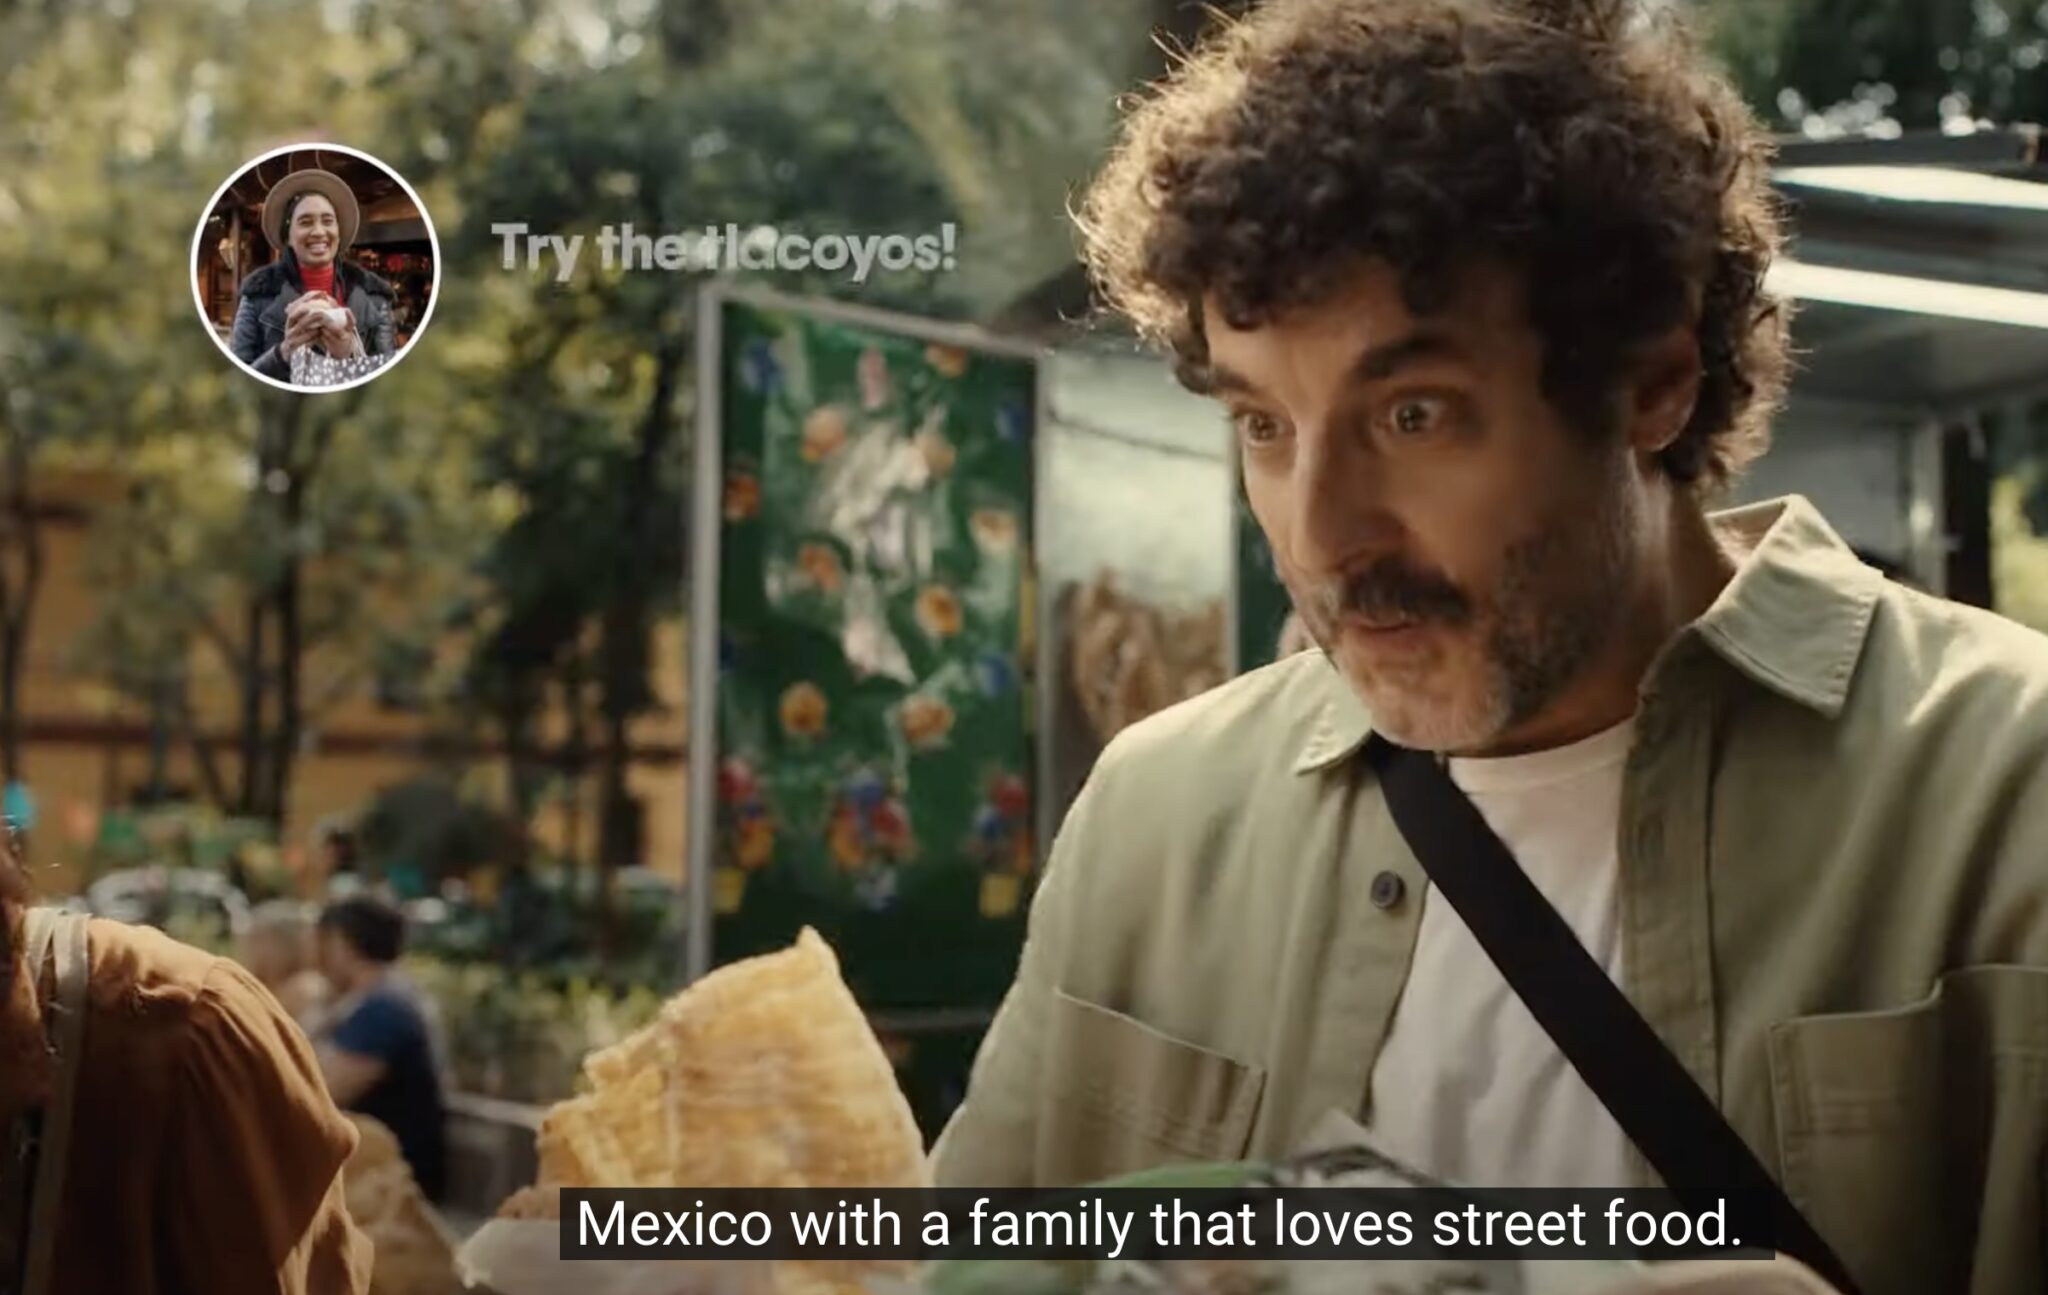 As part of a Tripadvisor video about Mexico, a dad is shown eating food. Source: Tripadvisor/YouTube https://youtu.be/qBLPEgjEcC8